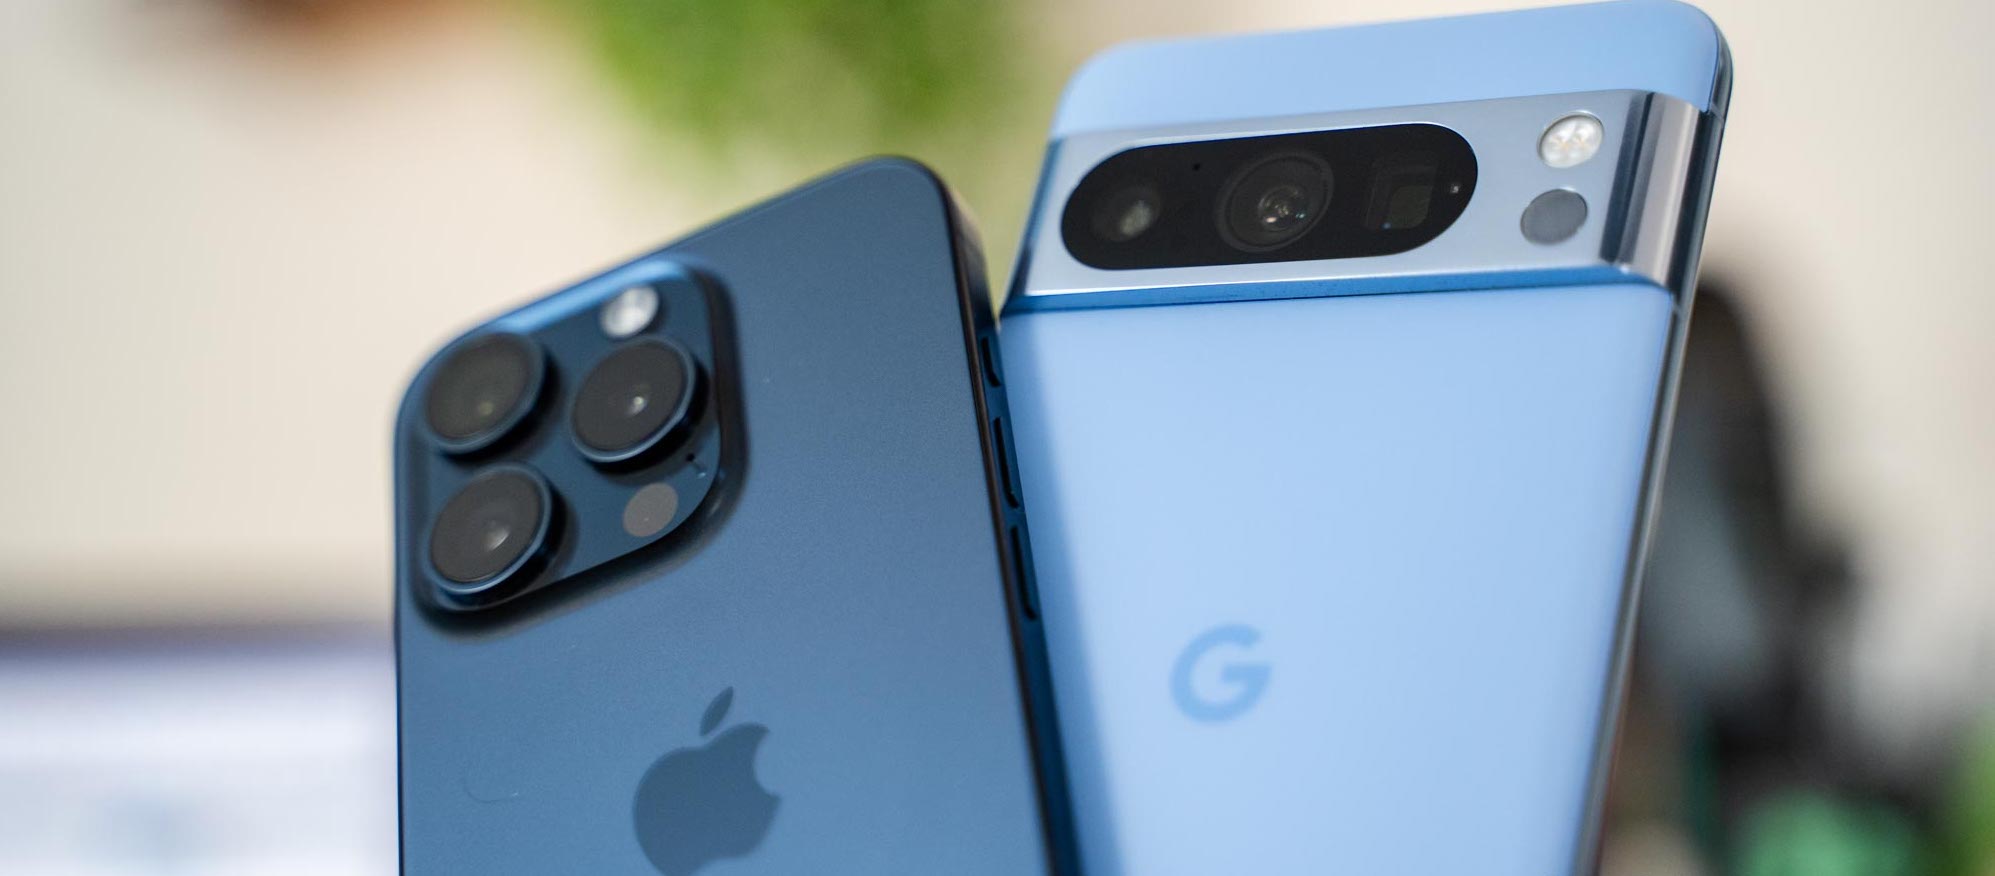 The dynamics of the transition from Android to iPhone slowed down in 2023